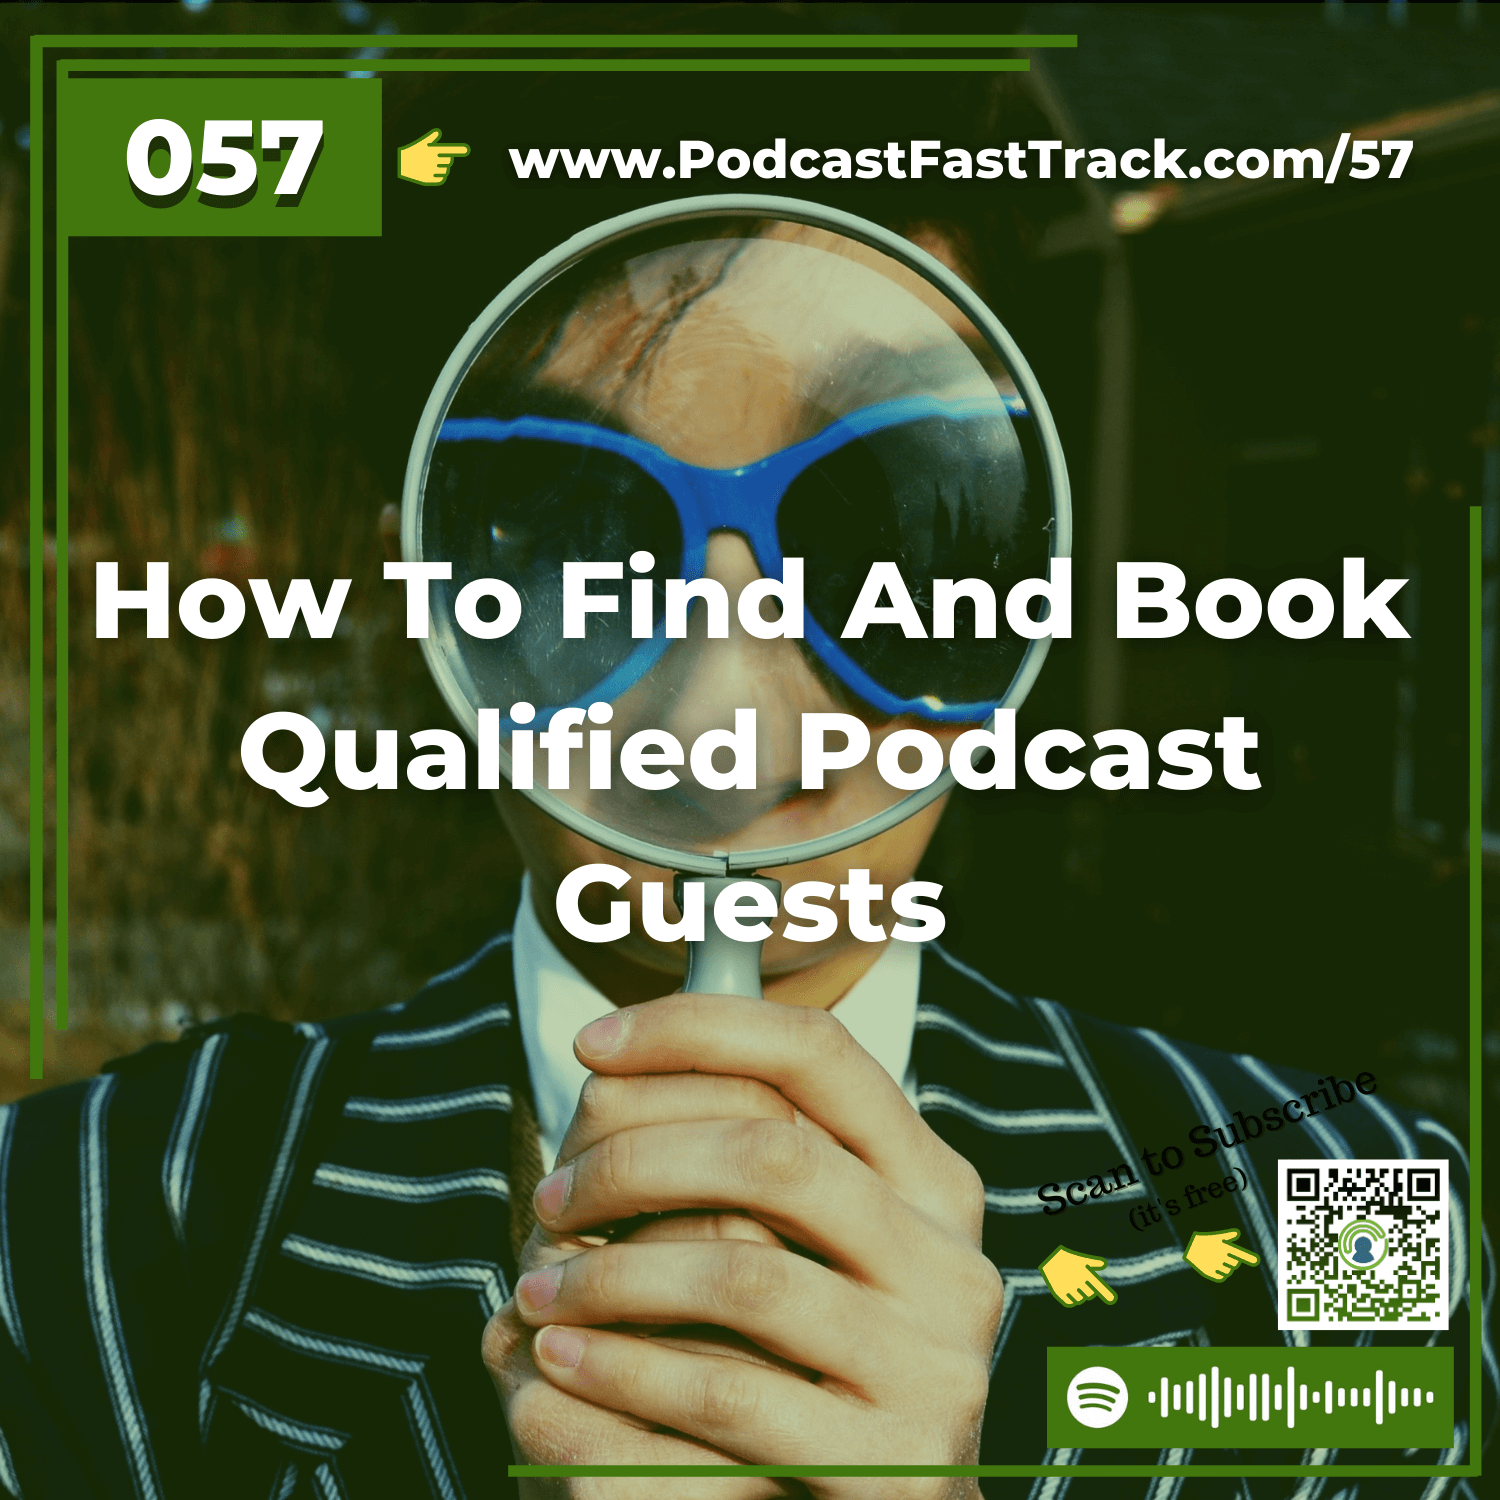 57: How To Find And Book Qualified Podcast Guests